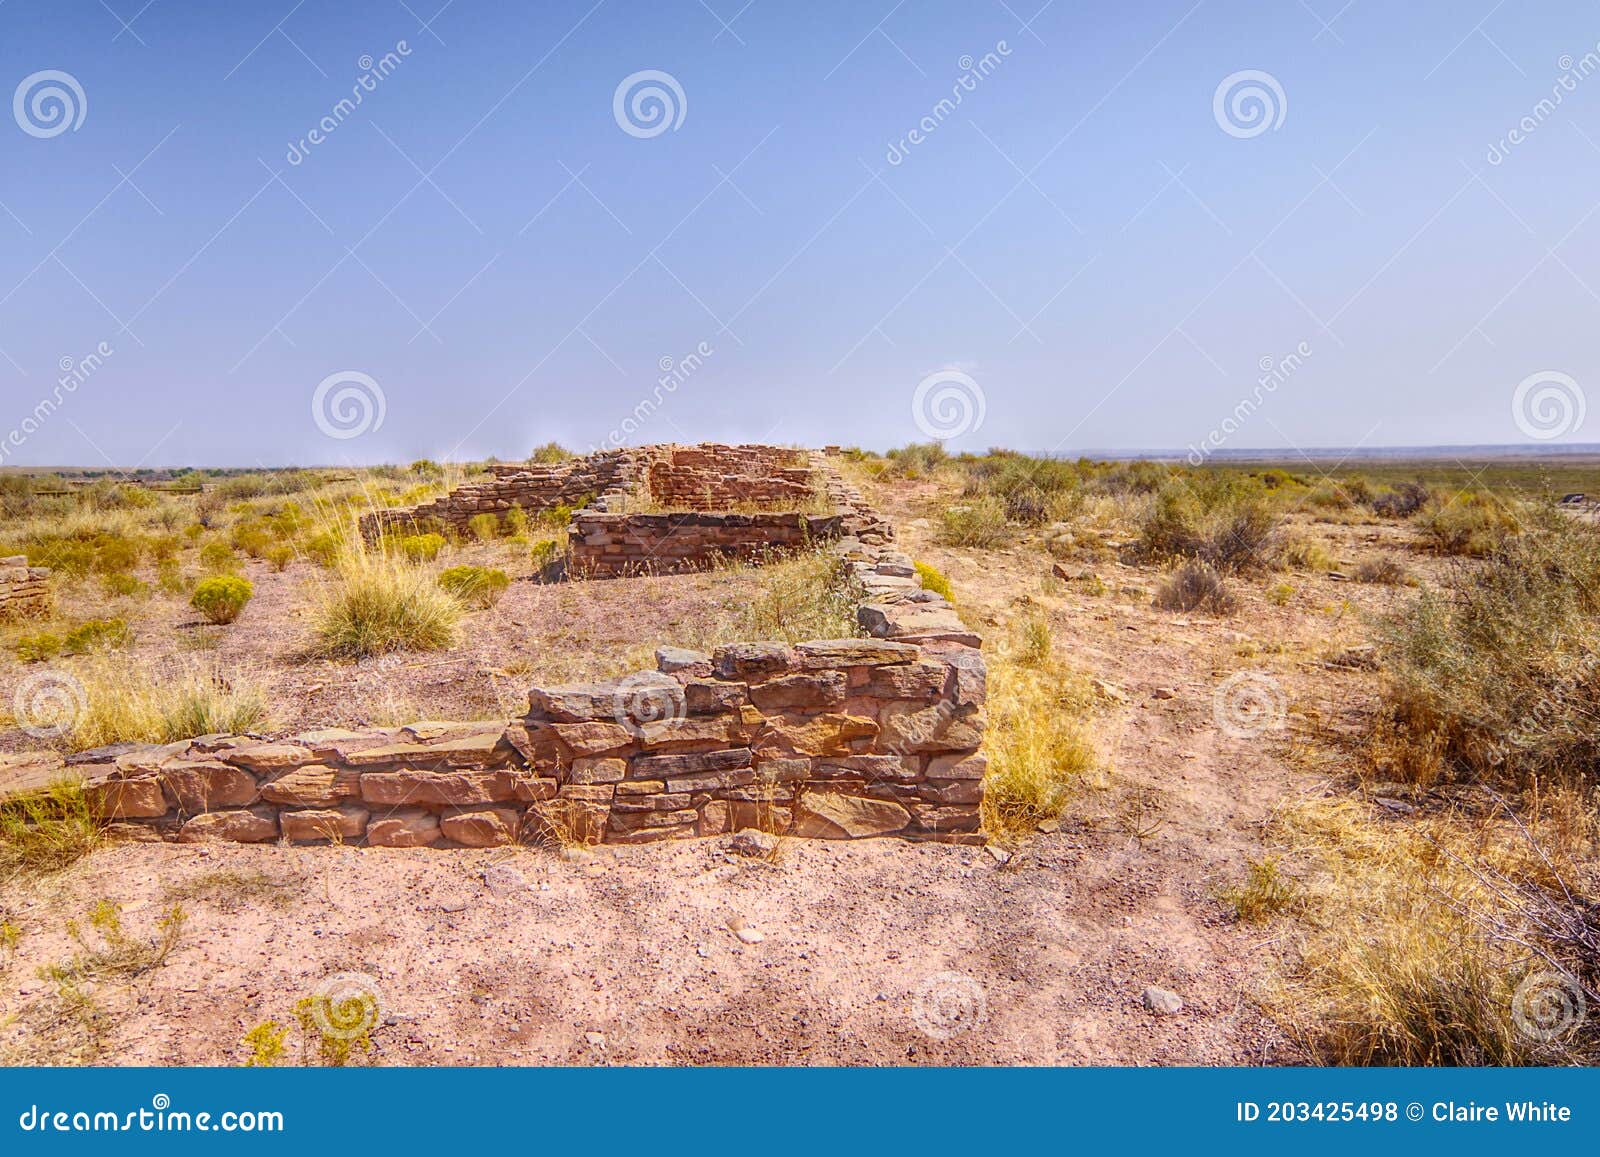 hdr landscape. ancestral puebloan ruins along the puerco pueblo trail at petrified forest national park in arizona.